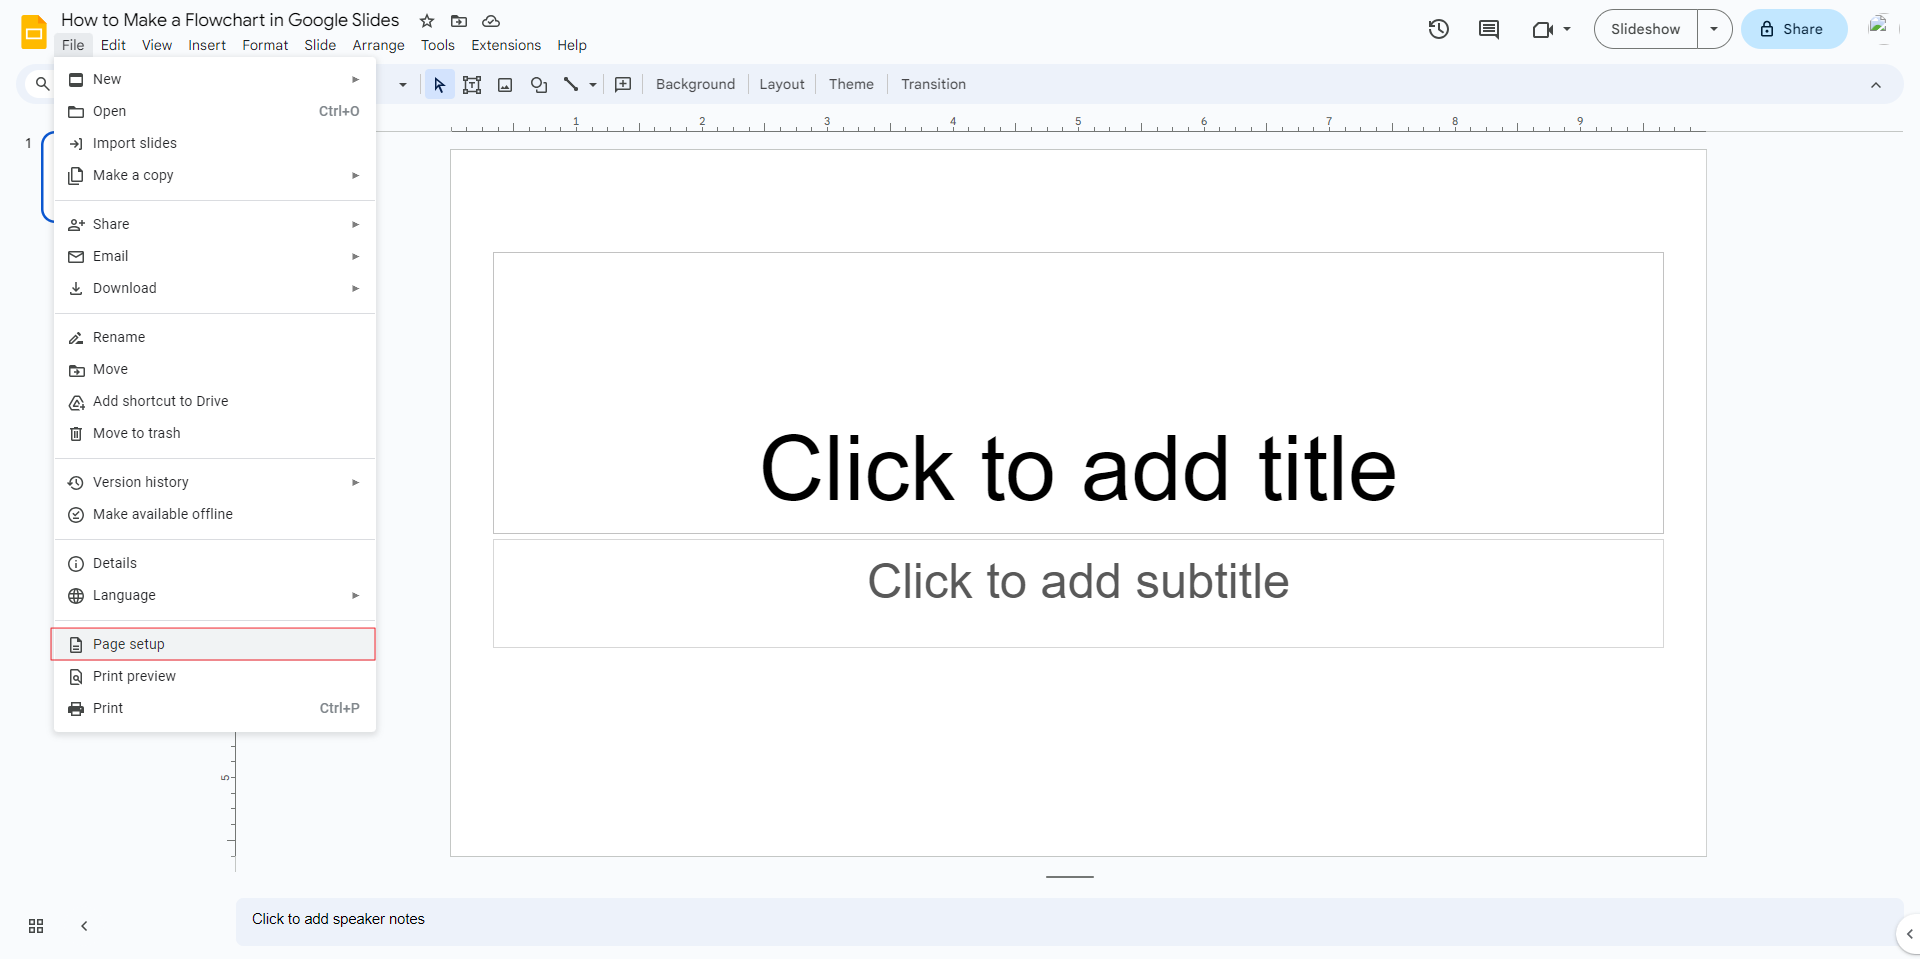 Step 2: Setting up your Slide